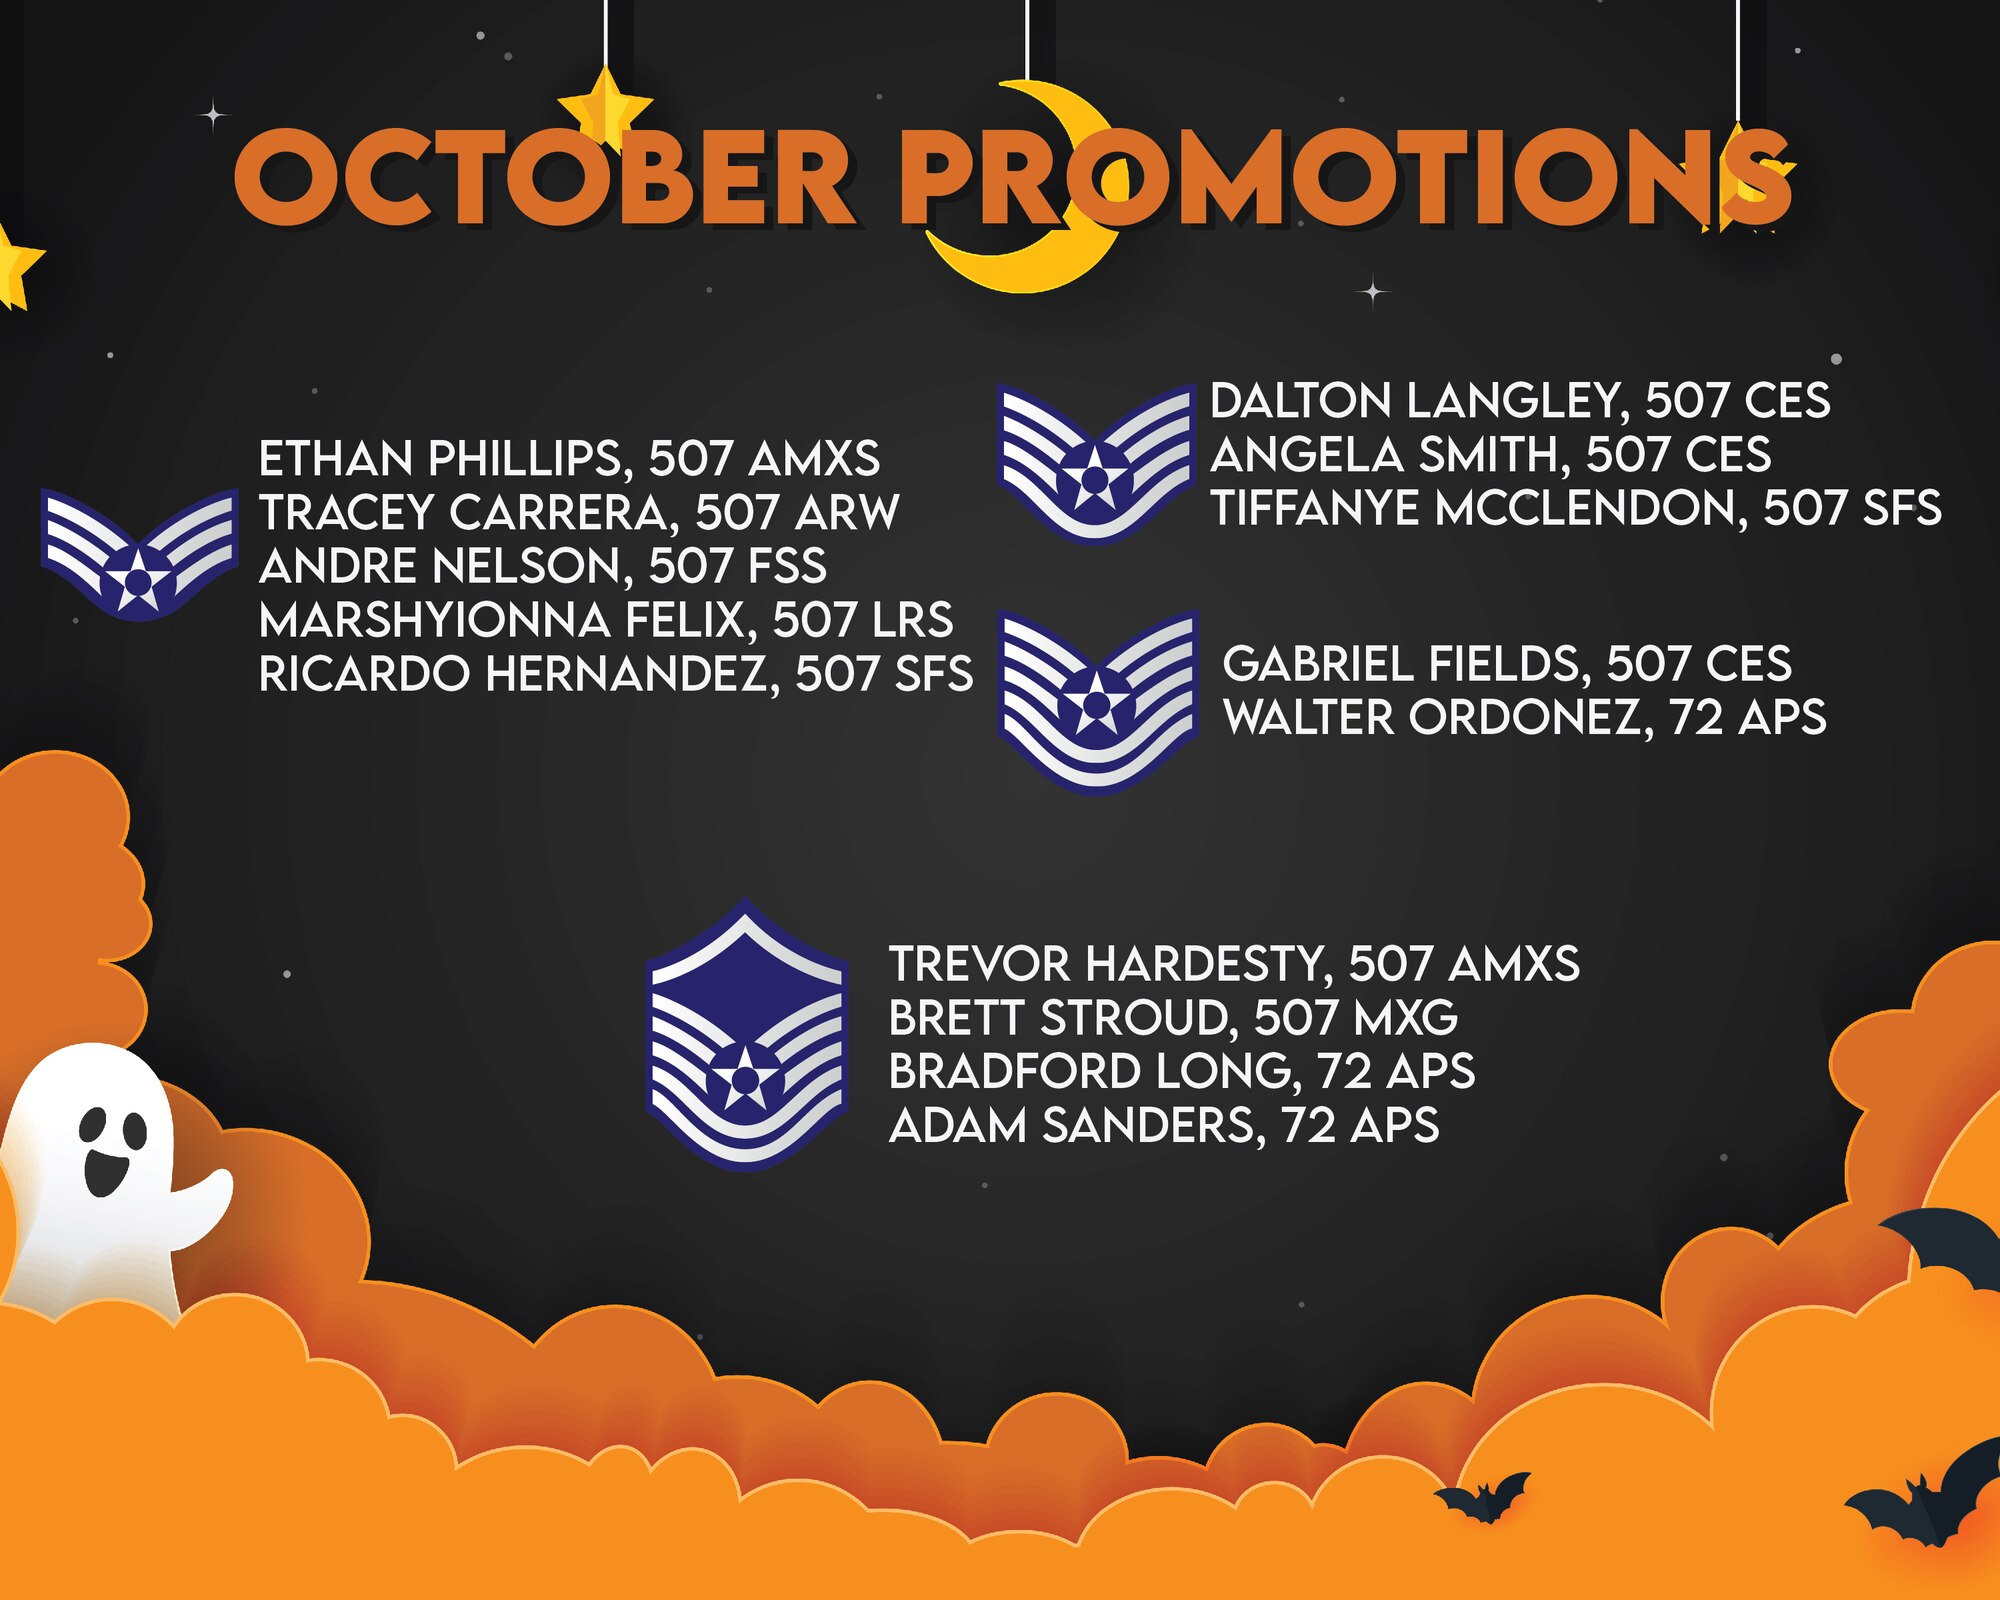 The October 2020 Enlisted Promotions graphic from the 507th Air Refueling Wing at Tinker Air Force Base, Oklahoma. (U.S. Air Force graphic by Senior Airman Mary Begy)